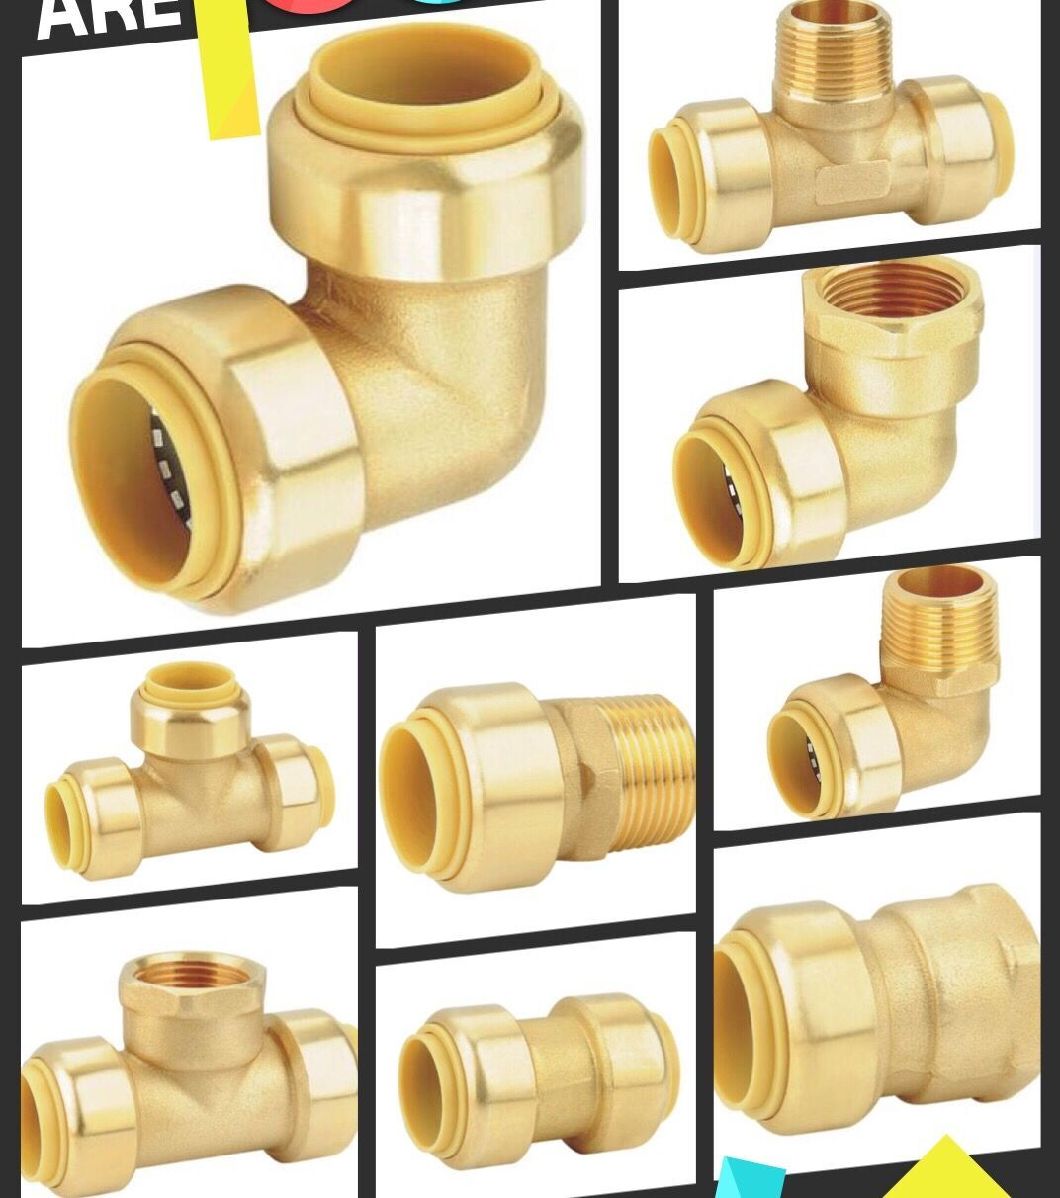 Push Fit Fittings, Lead Free Brass Push Fit Straight Coupling for Copper Pipe